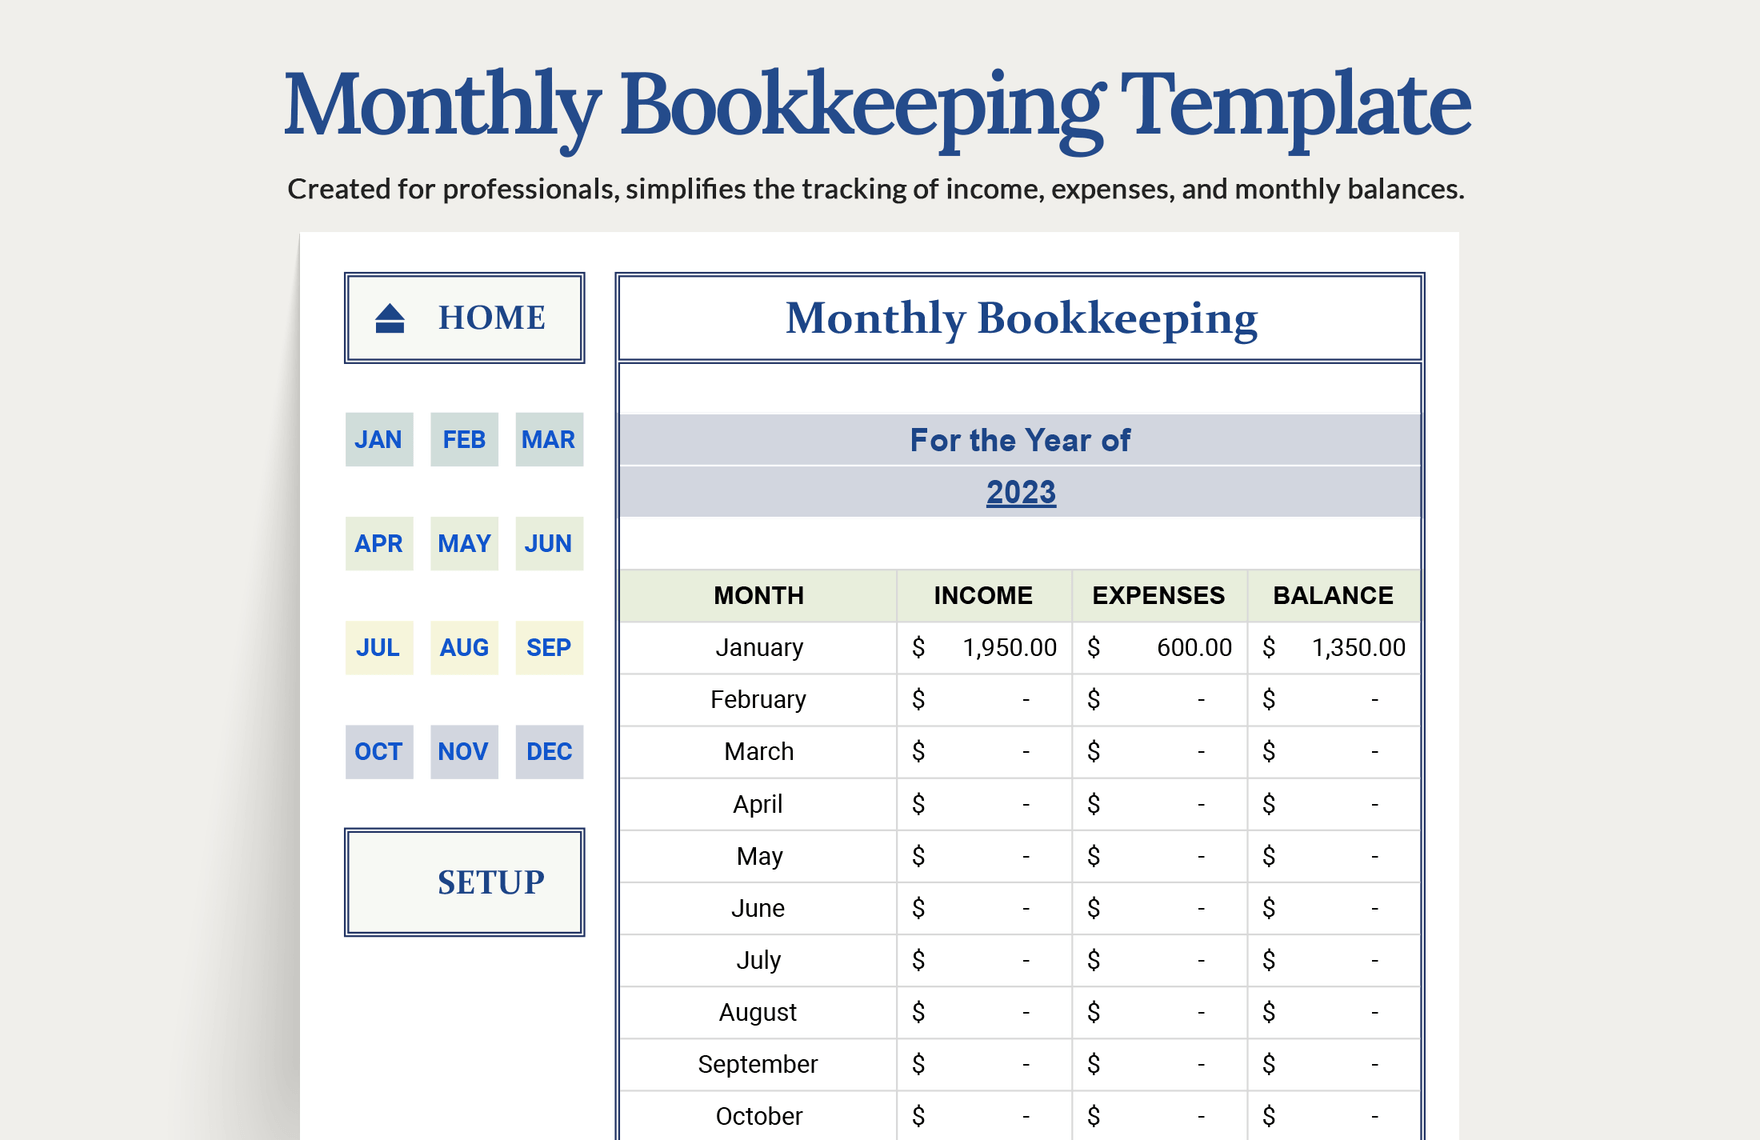 Monthly Bookkeeping Template